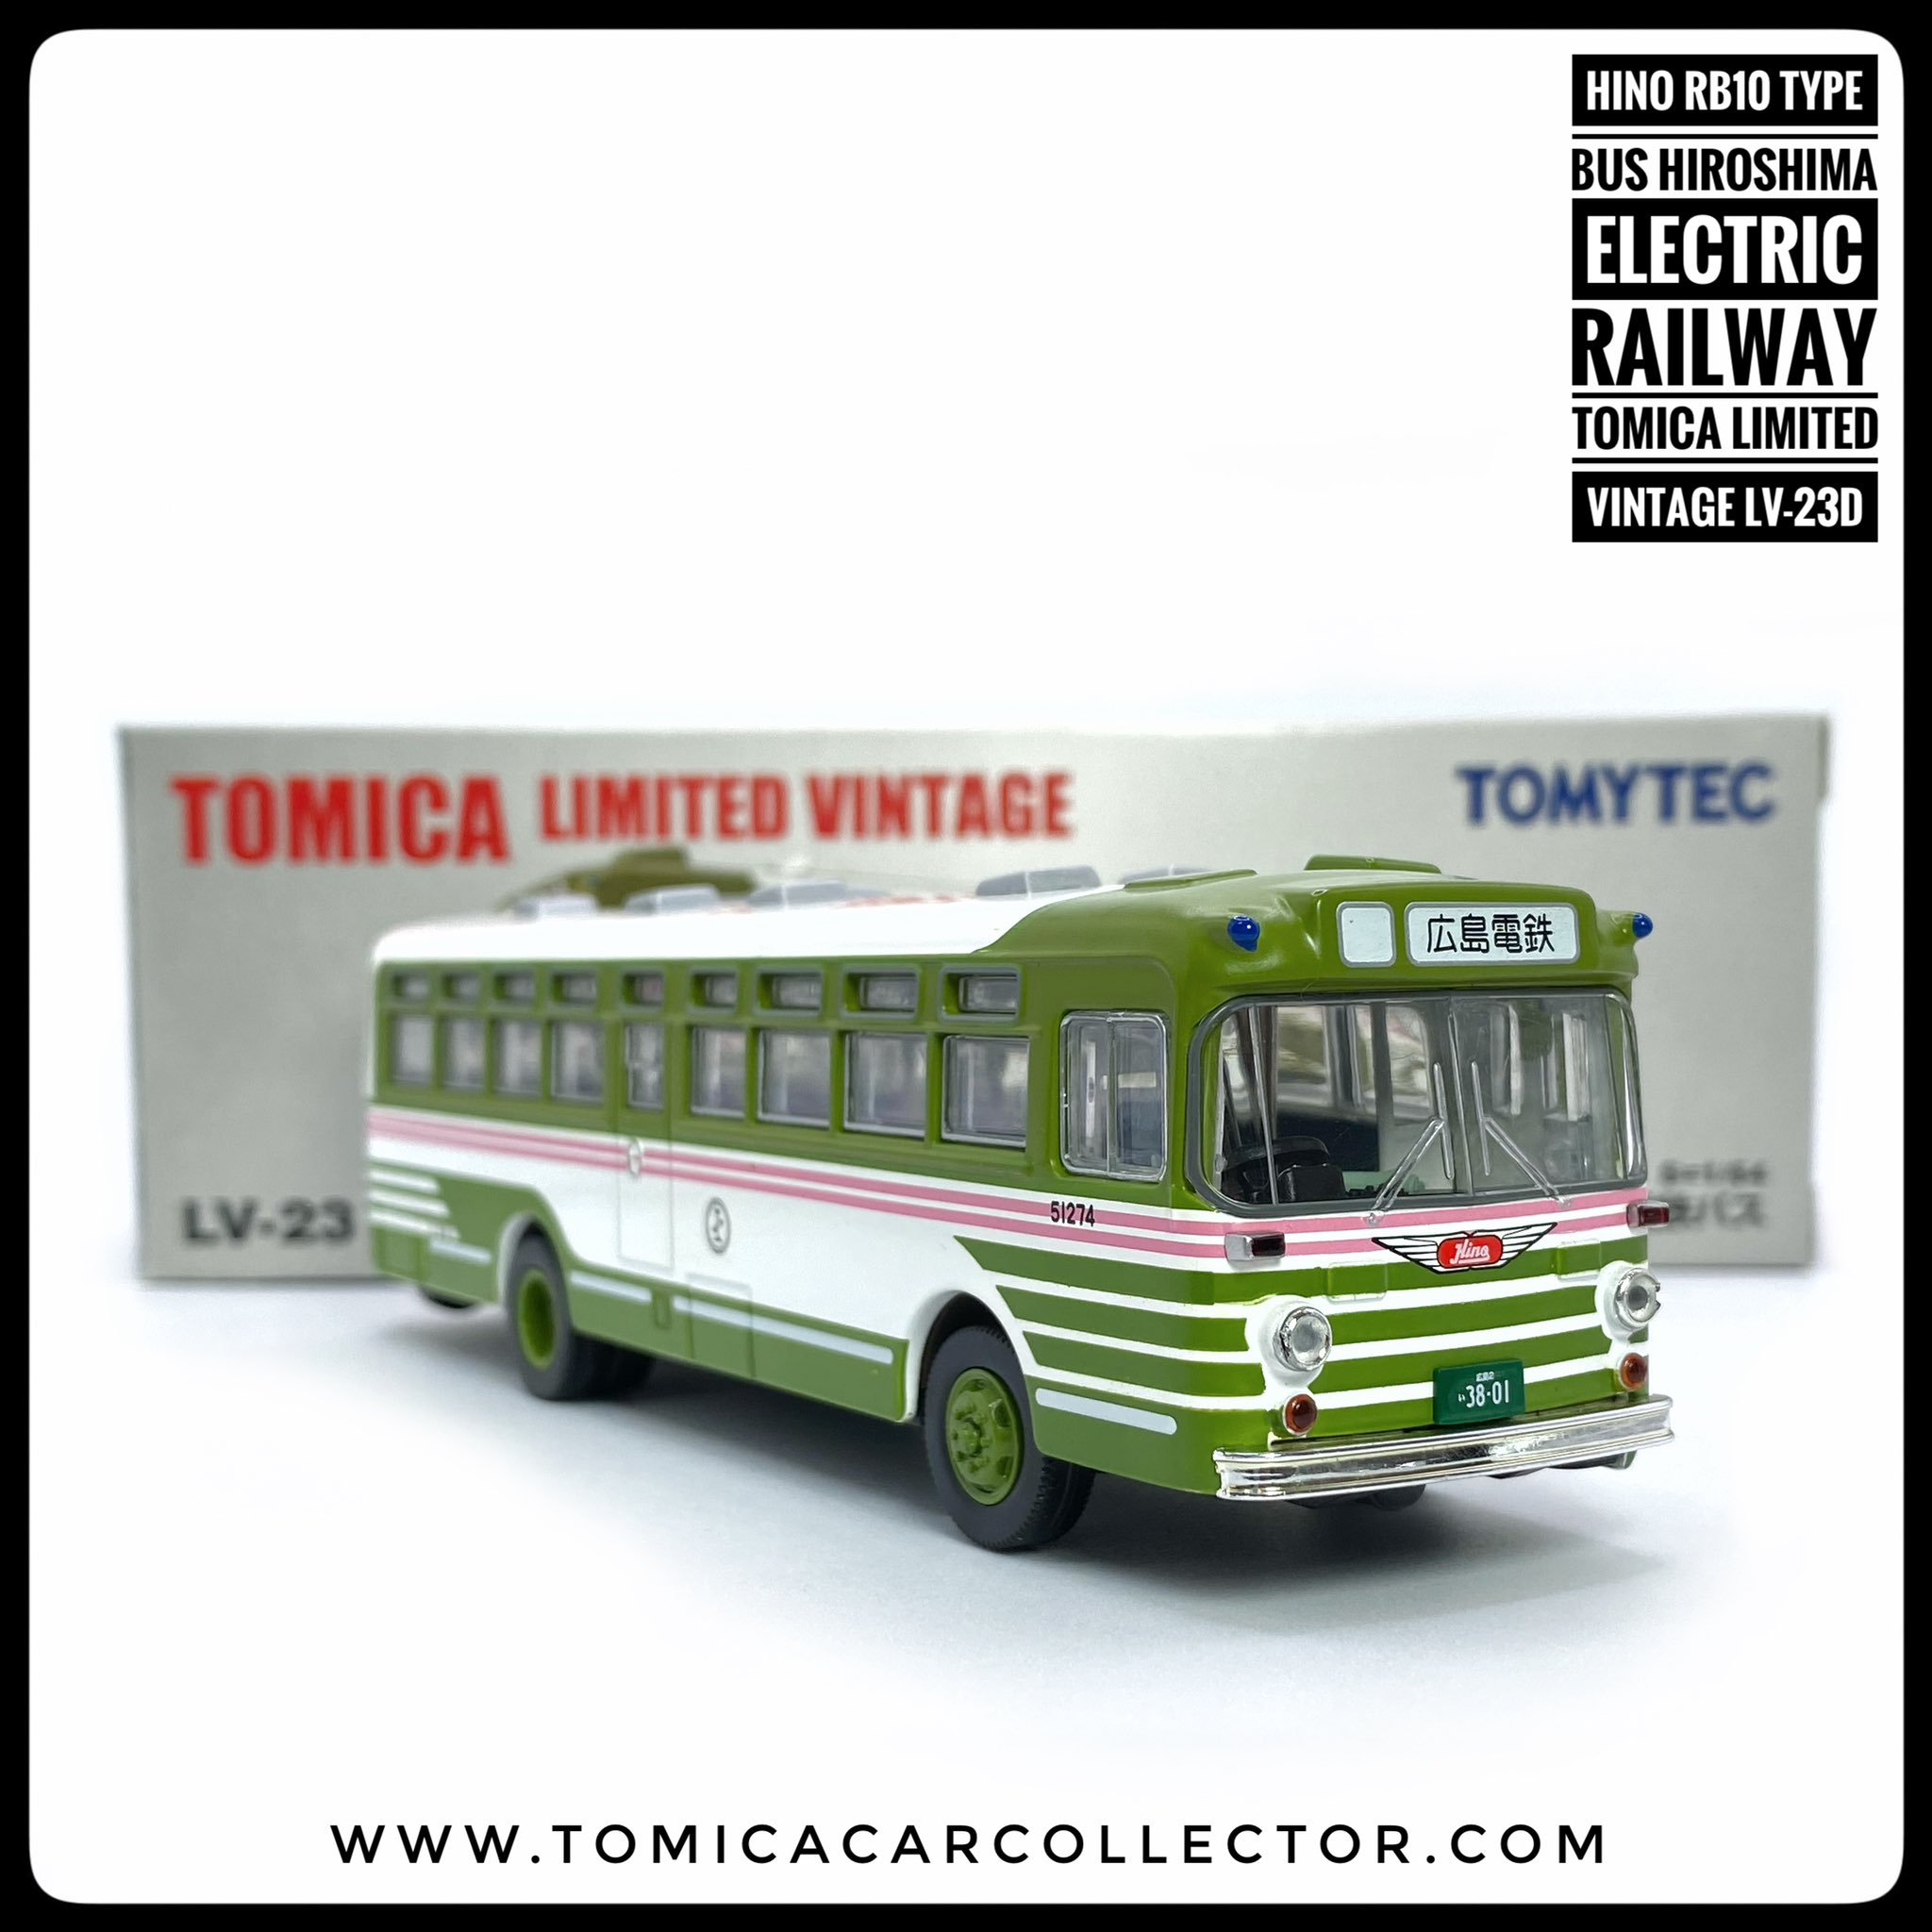 Tomica.Car.Collector on X: Another amazingly well produced TLV